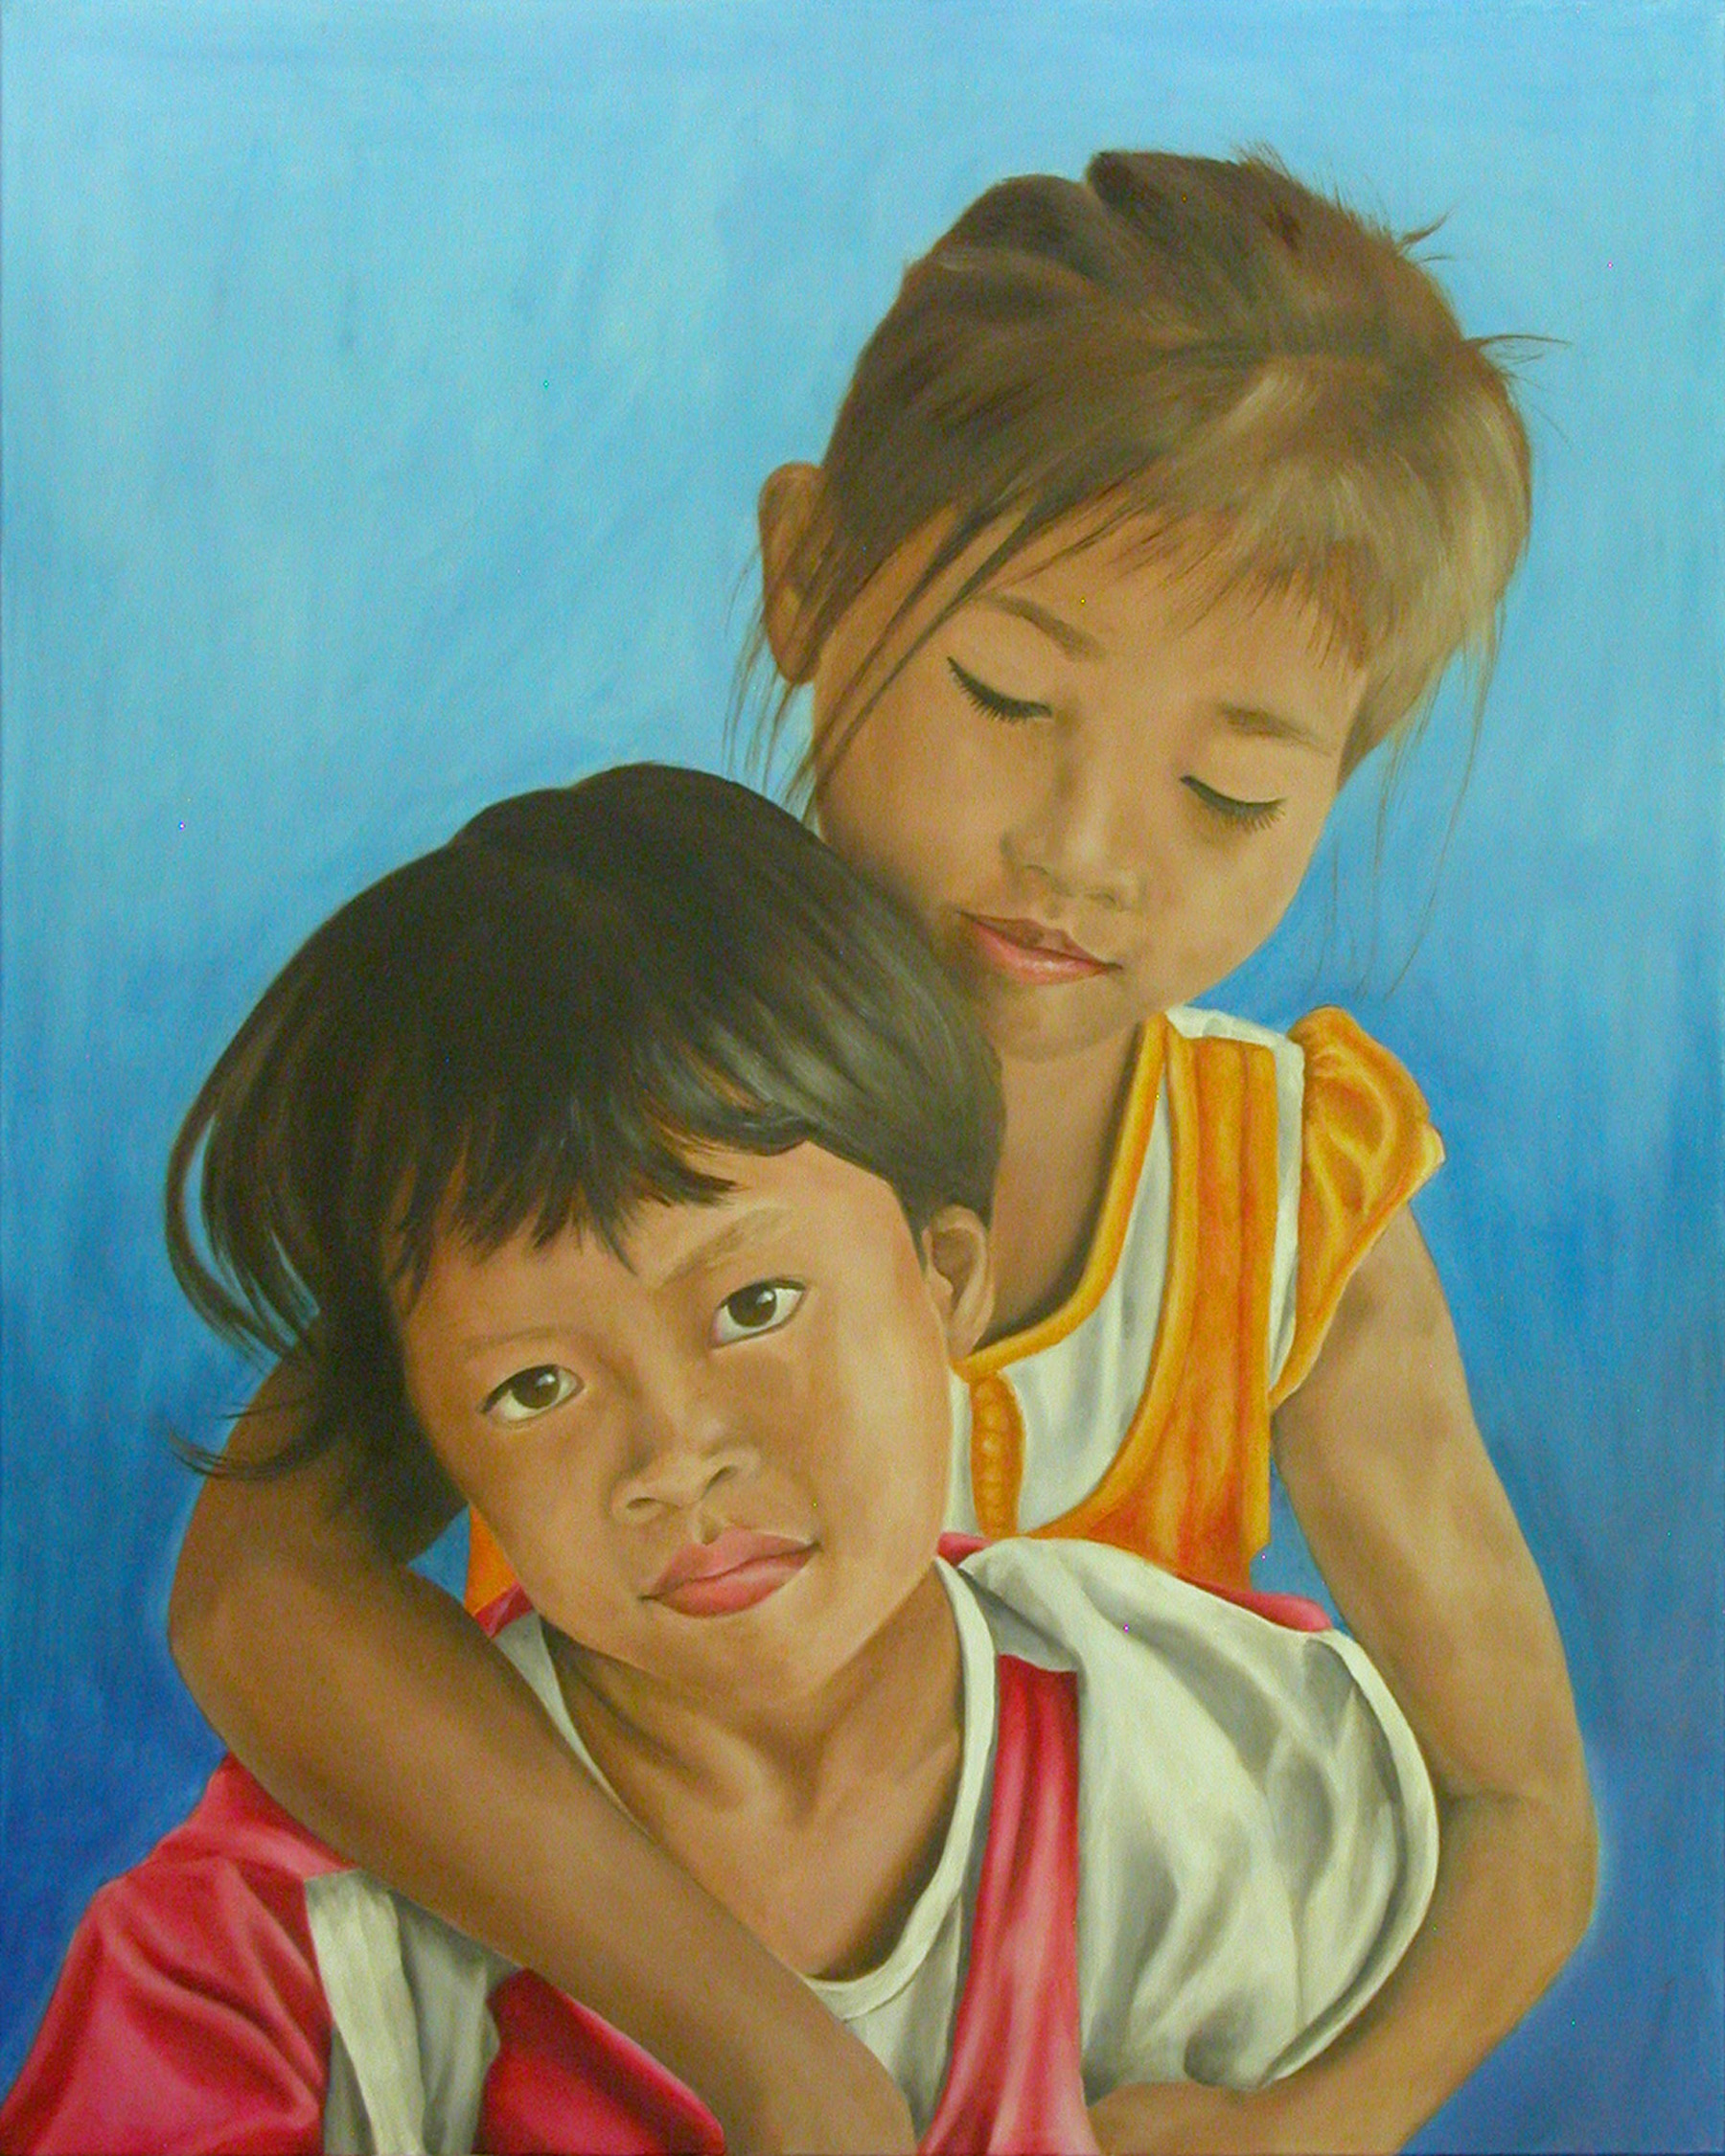 Cambodian Girls, oil on canvas by Robert Markey